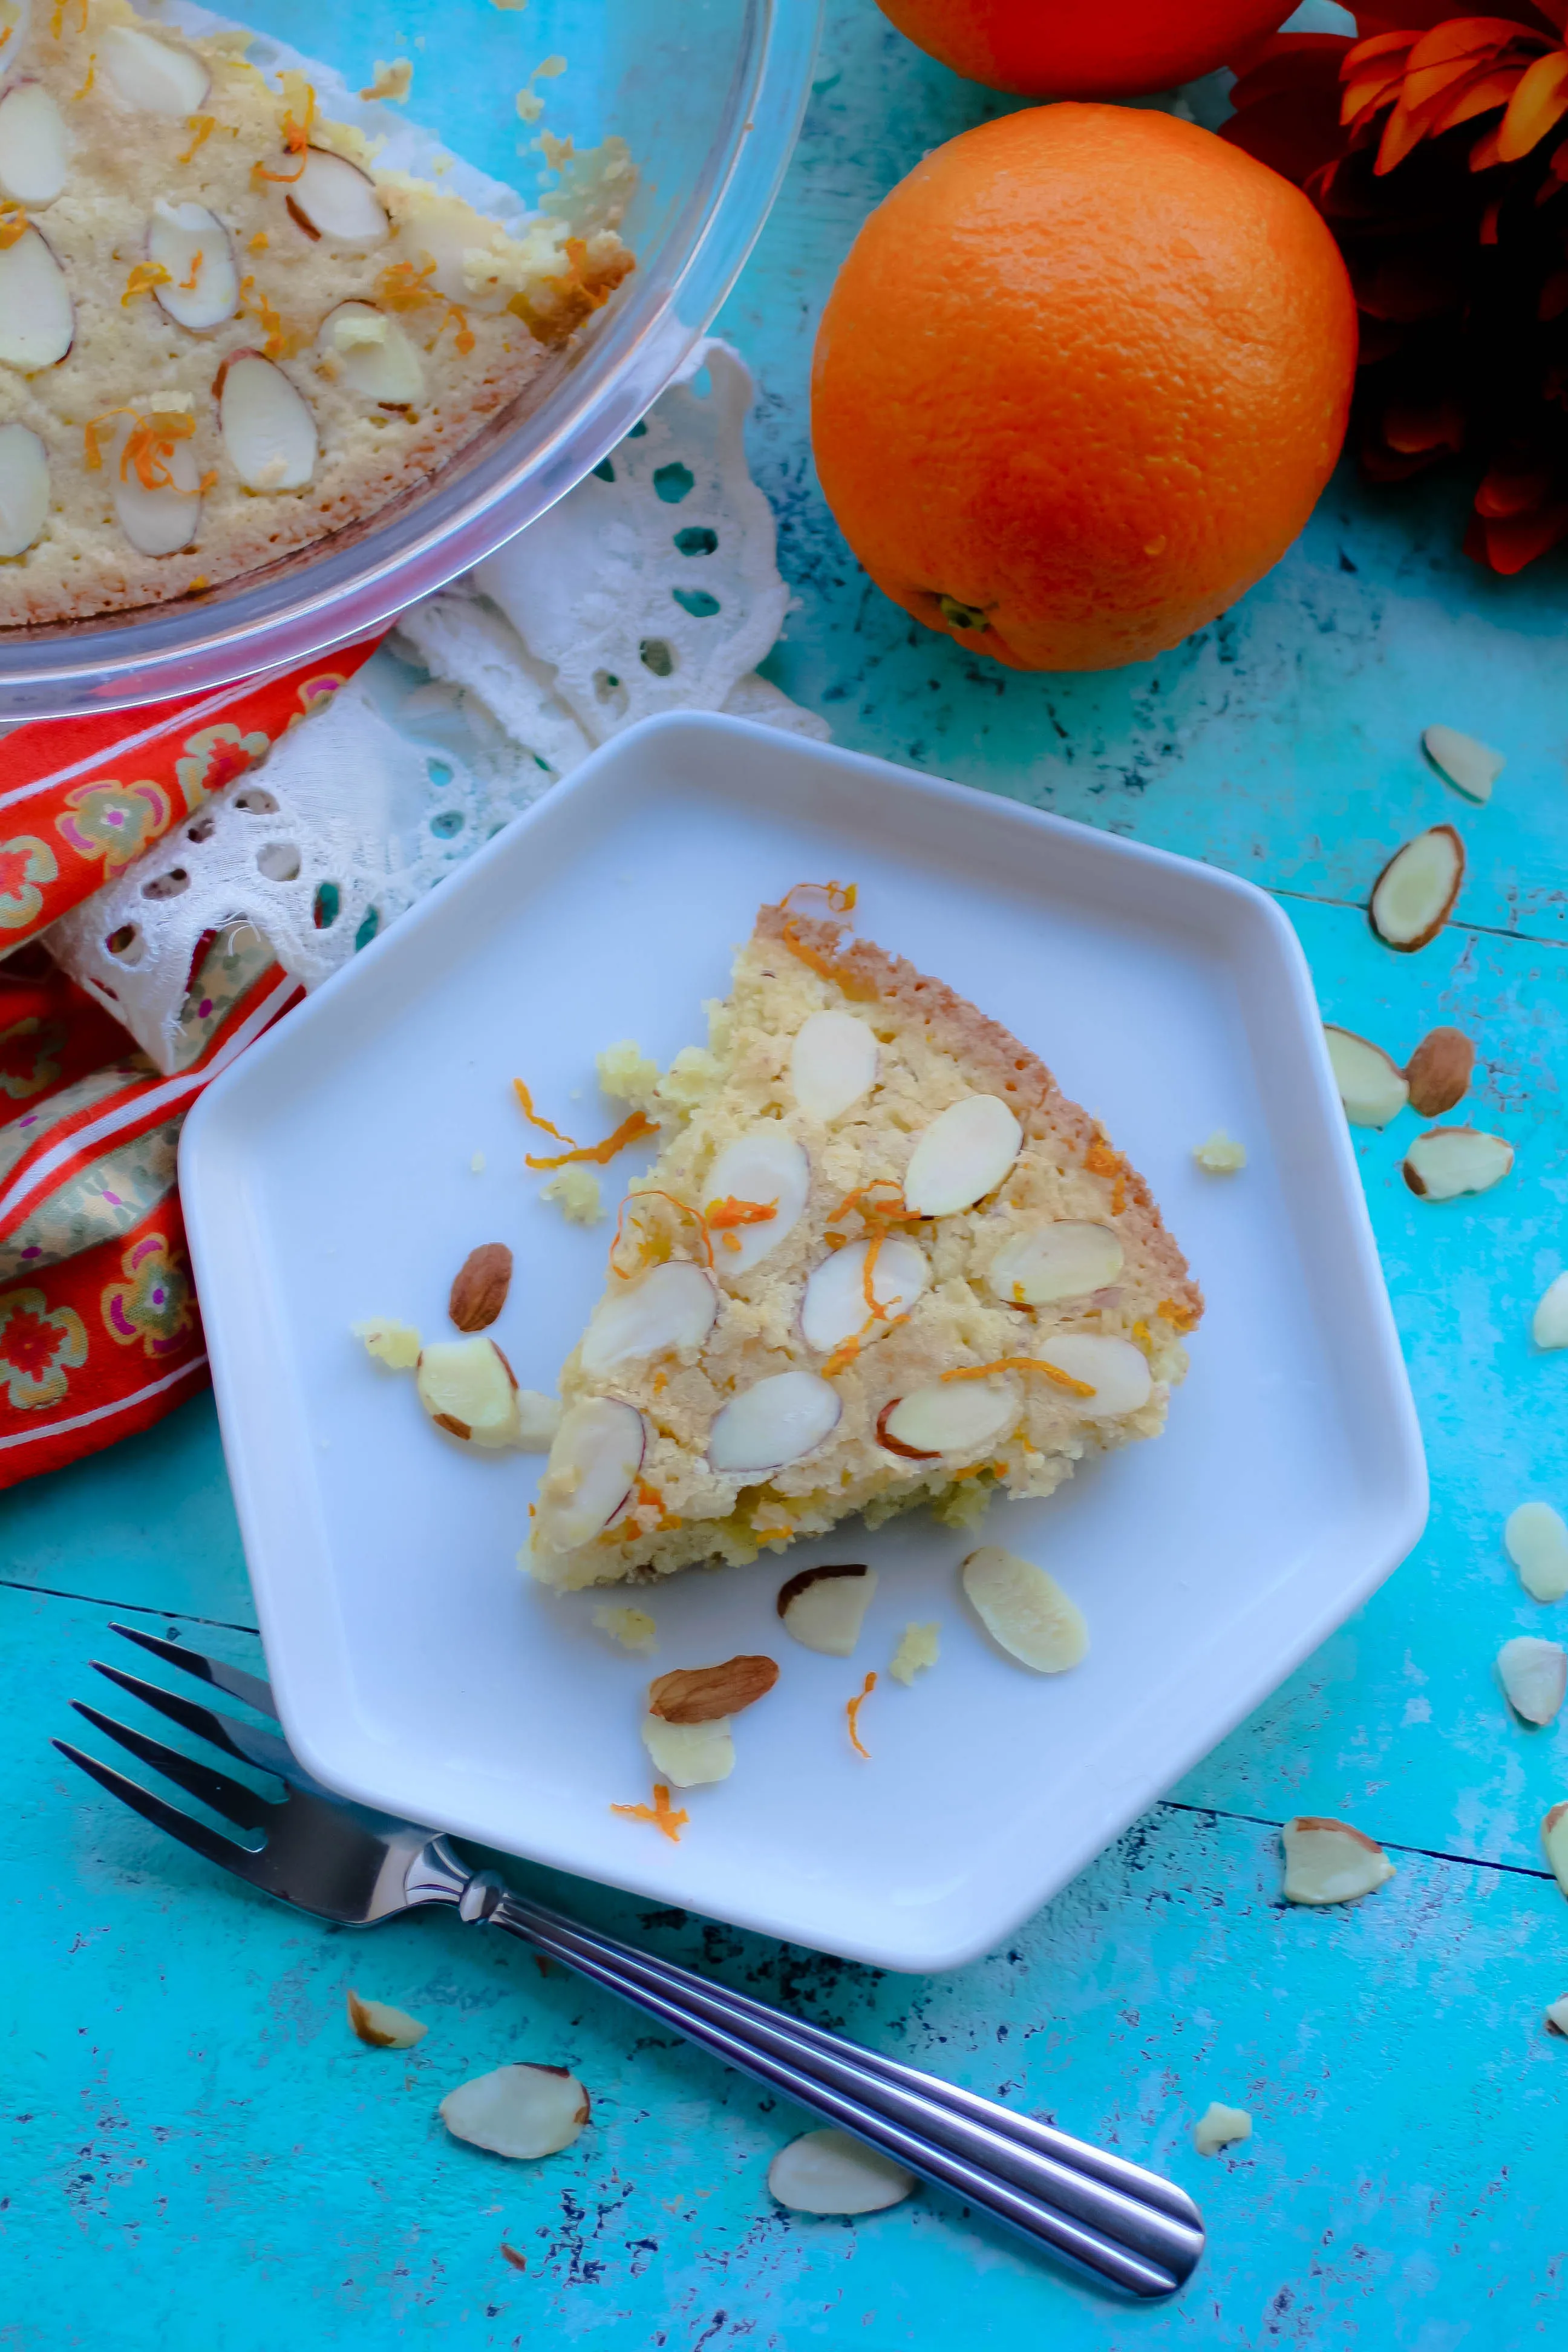 Almond-Orange Sunshine Cake is a dessert for any night of the week. You'll adore this Almond-Orange Sunshine Cake for dessert or in the morning with coffee.